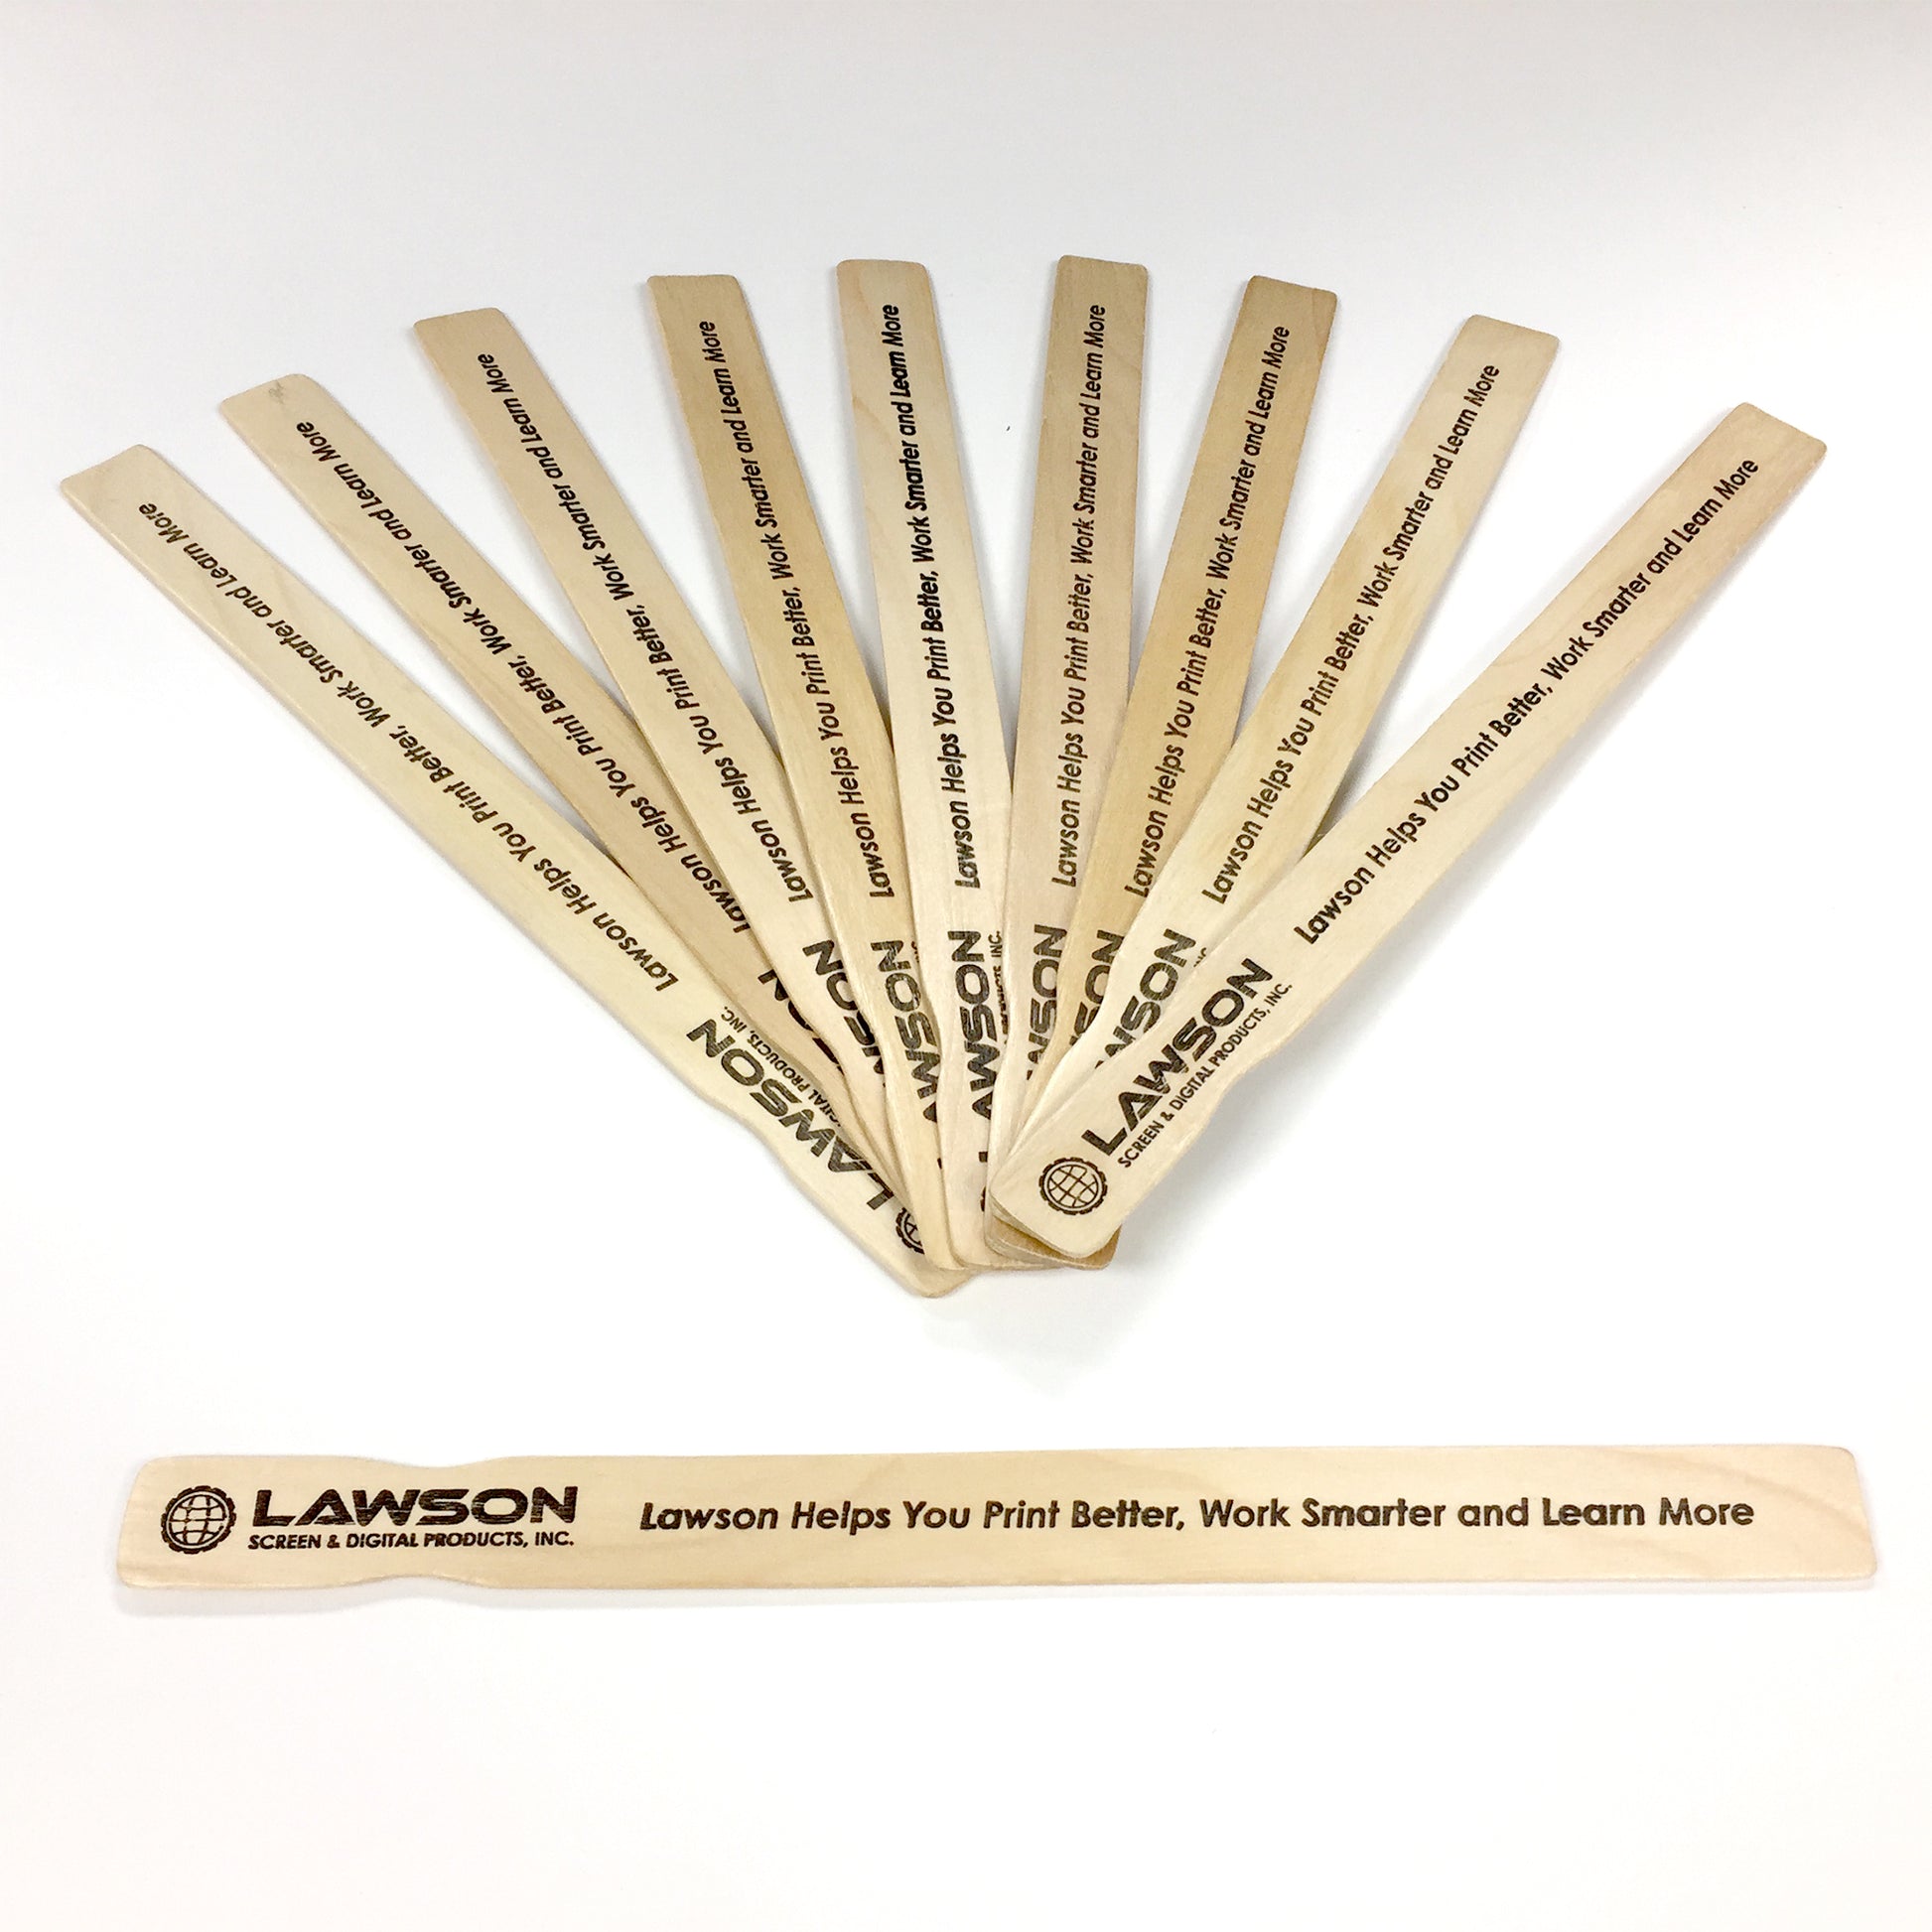 Hardwood Spatulas-Plastisol Ink Tools and Accessories-Lawson Screen & Digital Products Lawson Screen & Digital Products dtf printer screen printing direct to fabric equipment machine printers equipment dtg printer screen printing direct to garment equipment machine printers